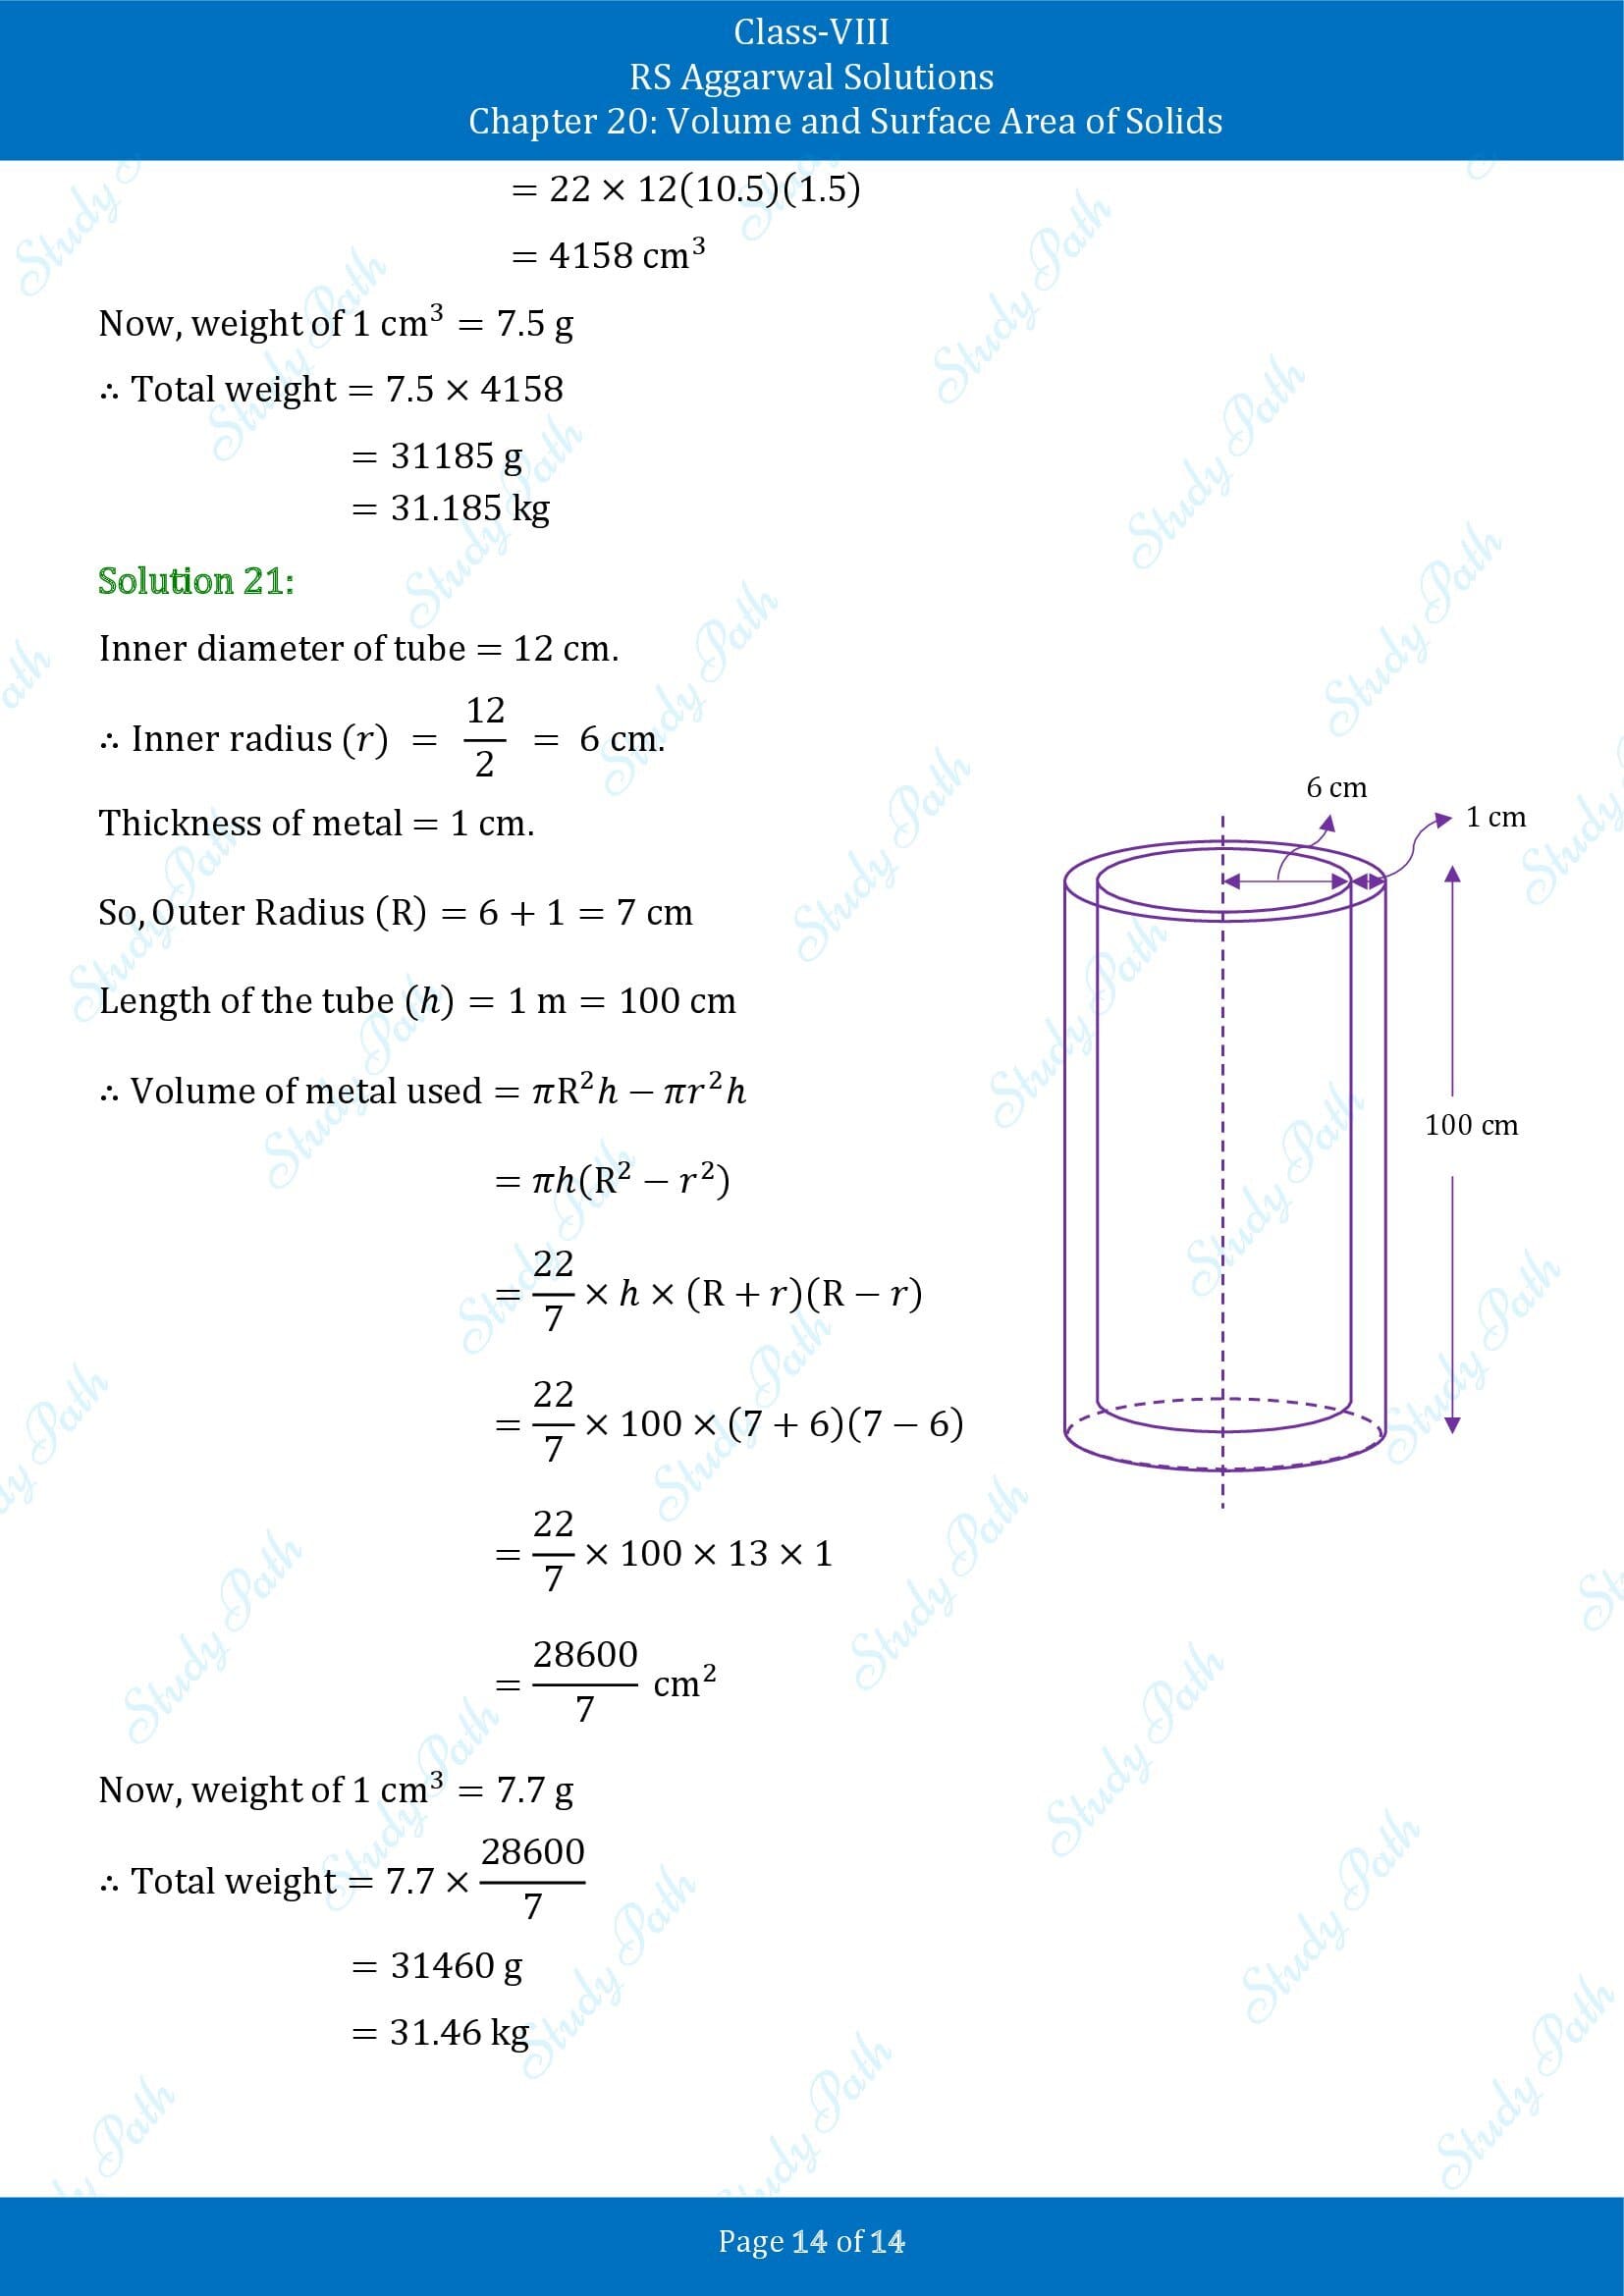 RS Aggarwal Solutions Class 8 Chapter 20 Volume and Surface Area of Solids Exercise 20B 00014